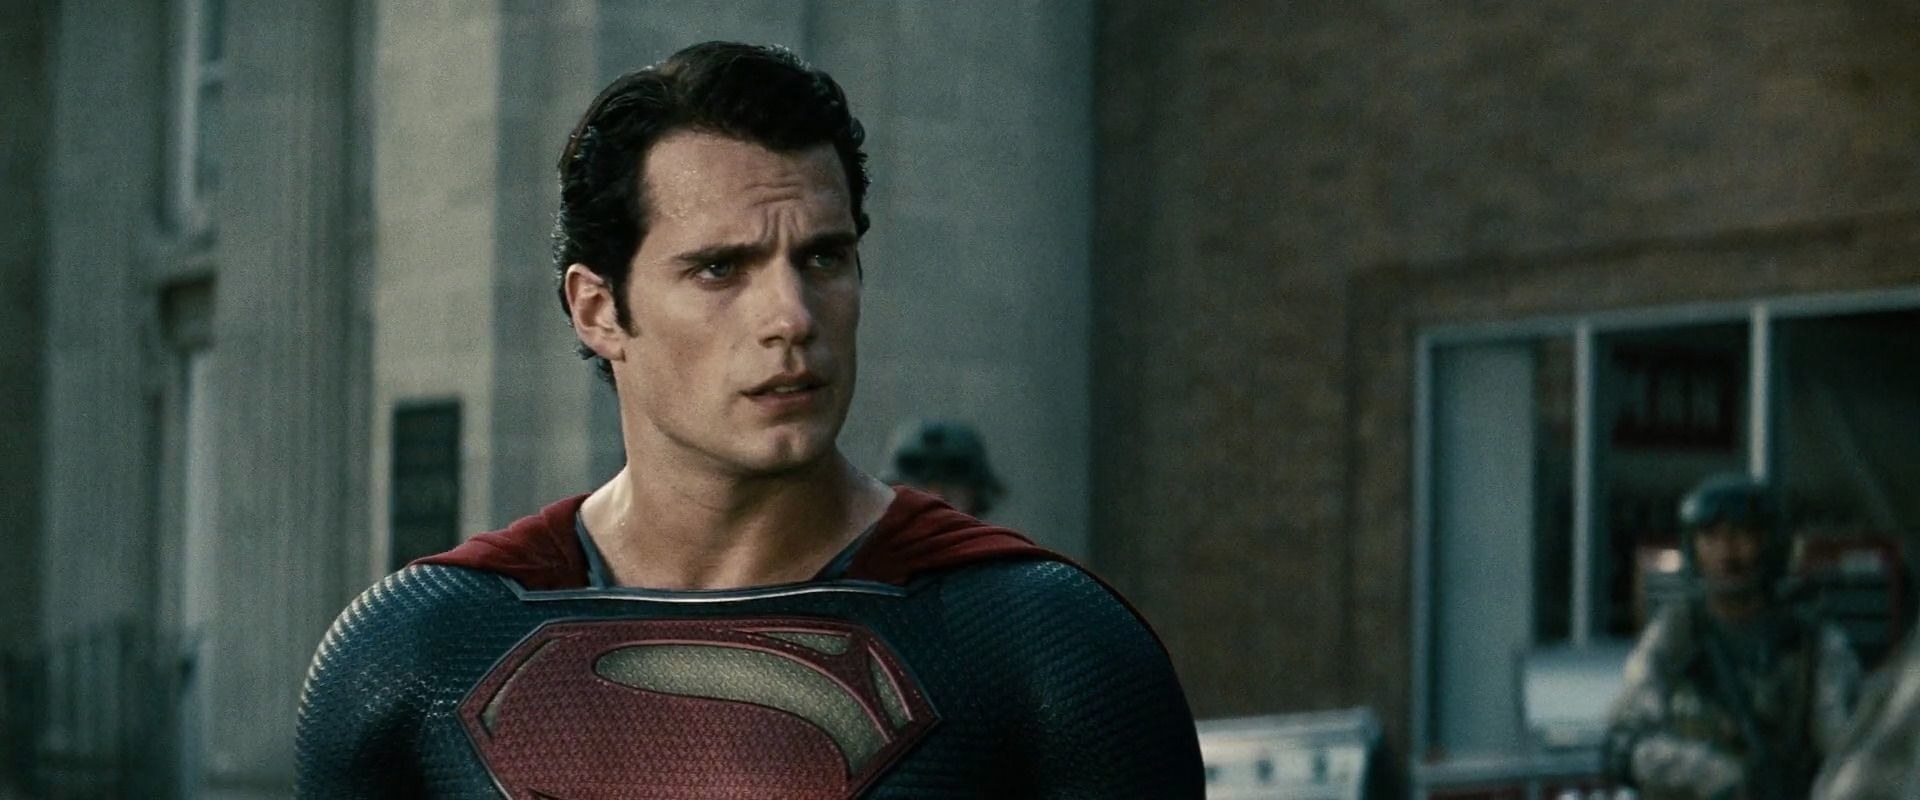 Superman standing with a confused expression